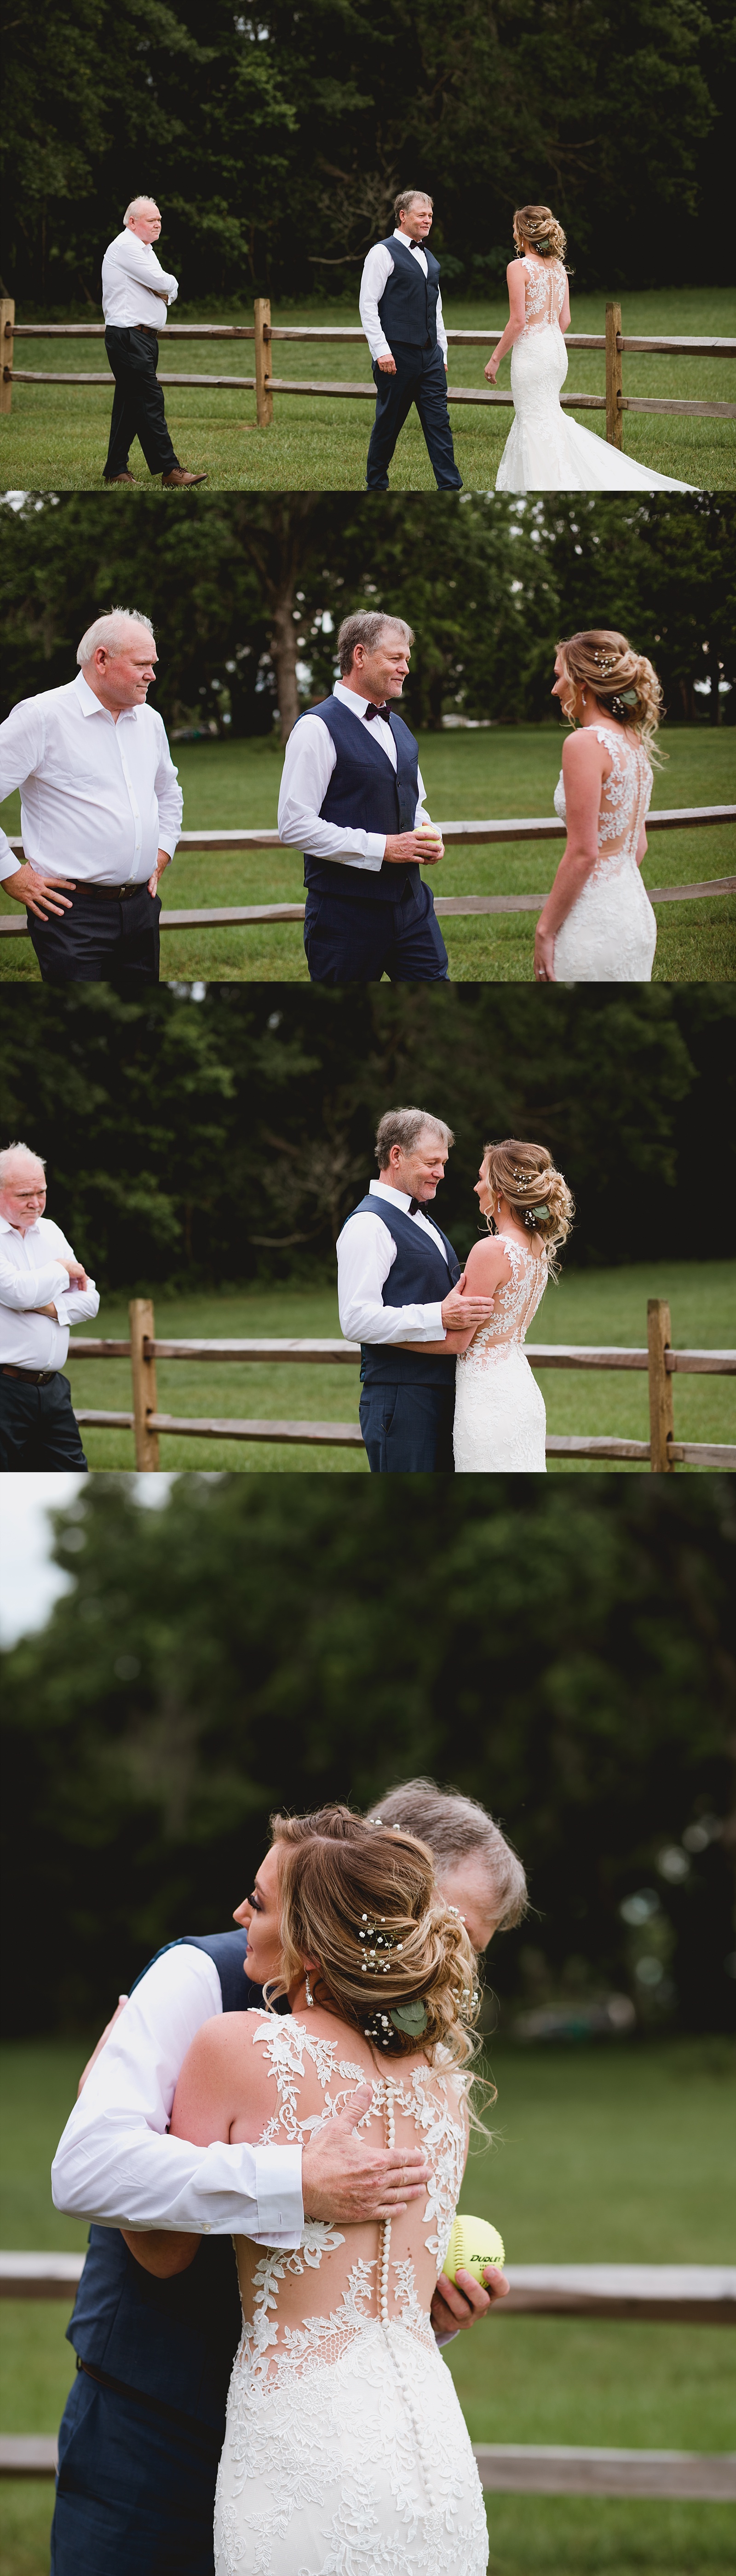 Father of the bride sees his daughter in her wedding gown for the first time.